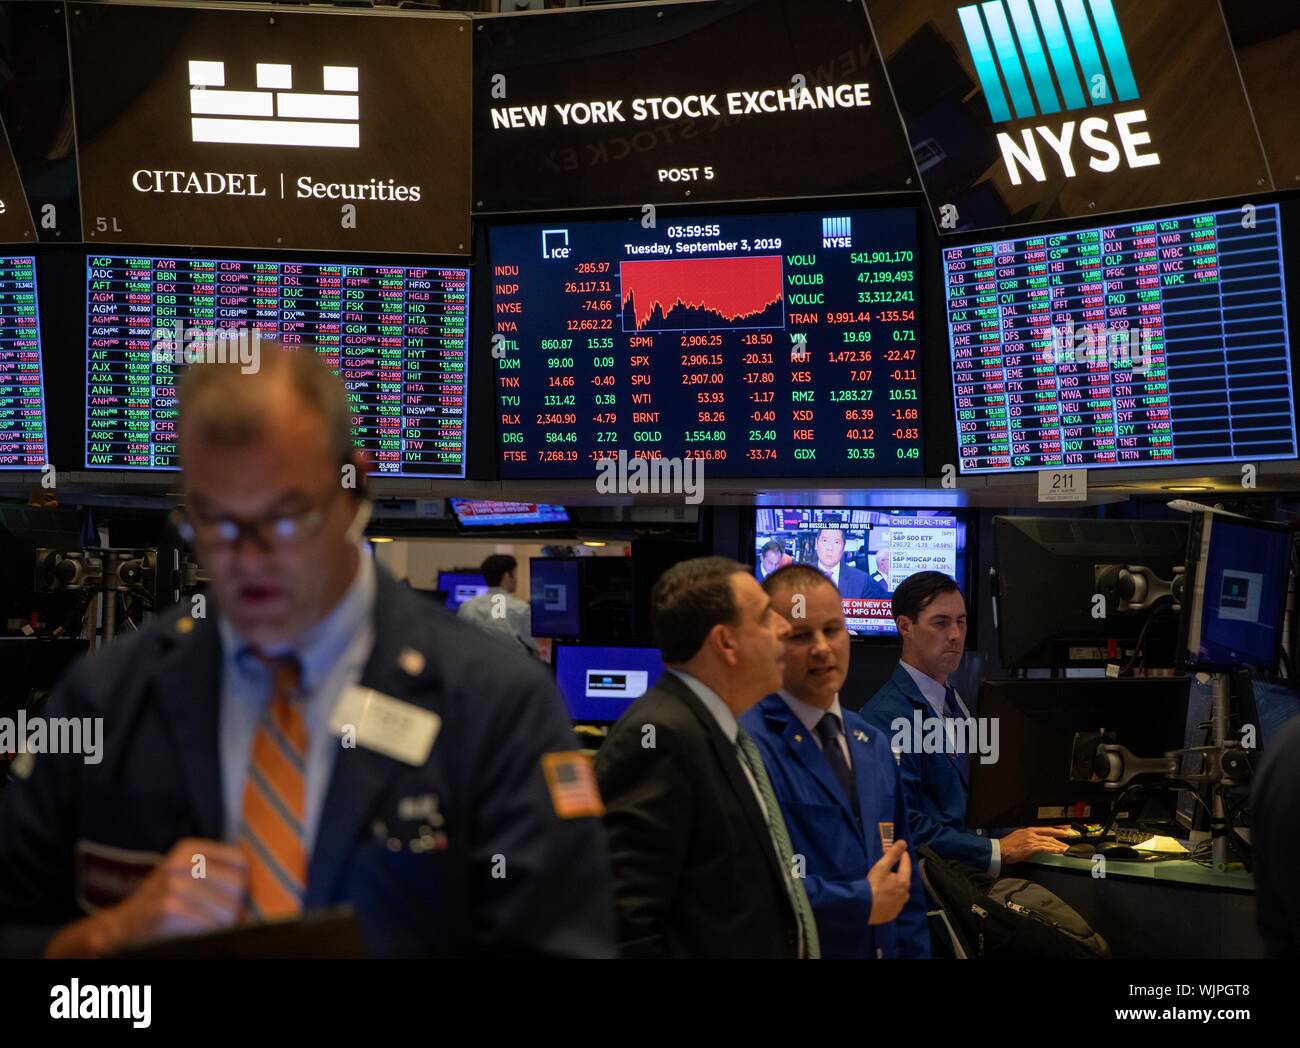 New York, USA. 3rd Sep, 2019. Traders work at the New York Stock Exchange in New York, the United States, on Sept. 3, 2019. U.S. stocks closed lower on Tuesday. The Dow Jones Industrial Average fell 285.26 points, or 1.08 percent, to 26,118.02. The S&P 500 was down 20.19 points, or 0.69 percent, to 2,906.27. The Nasdaq Composite Index fell 88.72 points, or 1.11 percent, to 7,874.16. Credit: Guo Peiran/Xinhua/Alamy Live News Stock Photo